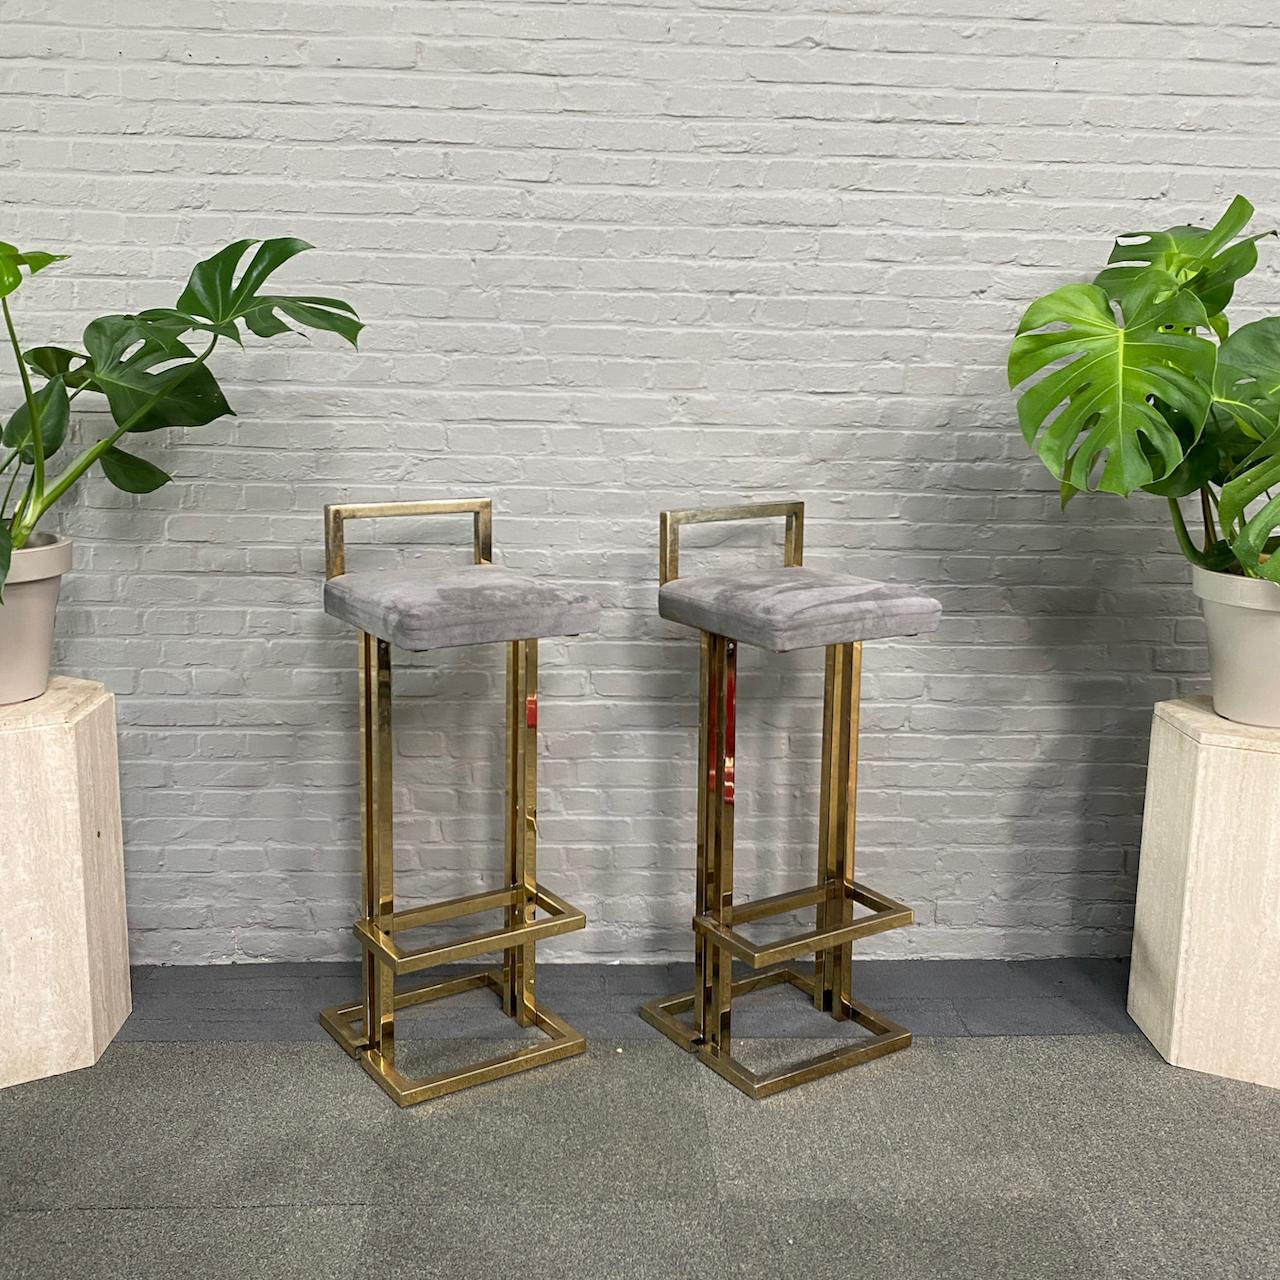 PAIR BELGO CHROM GOLD PLATED BAR STOOLS - BELGIUM 1980'S

Pair Belgo Chrom bar stools.
They are gold plated and have a suede grey upholstery.


Designer:	De Wulf
Brand:	Belgo Chrom
Model:	unknown
Place of